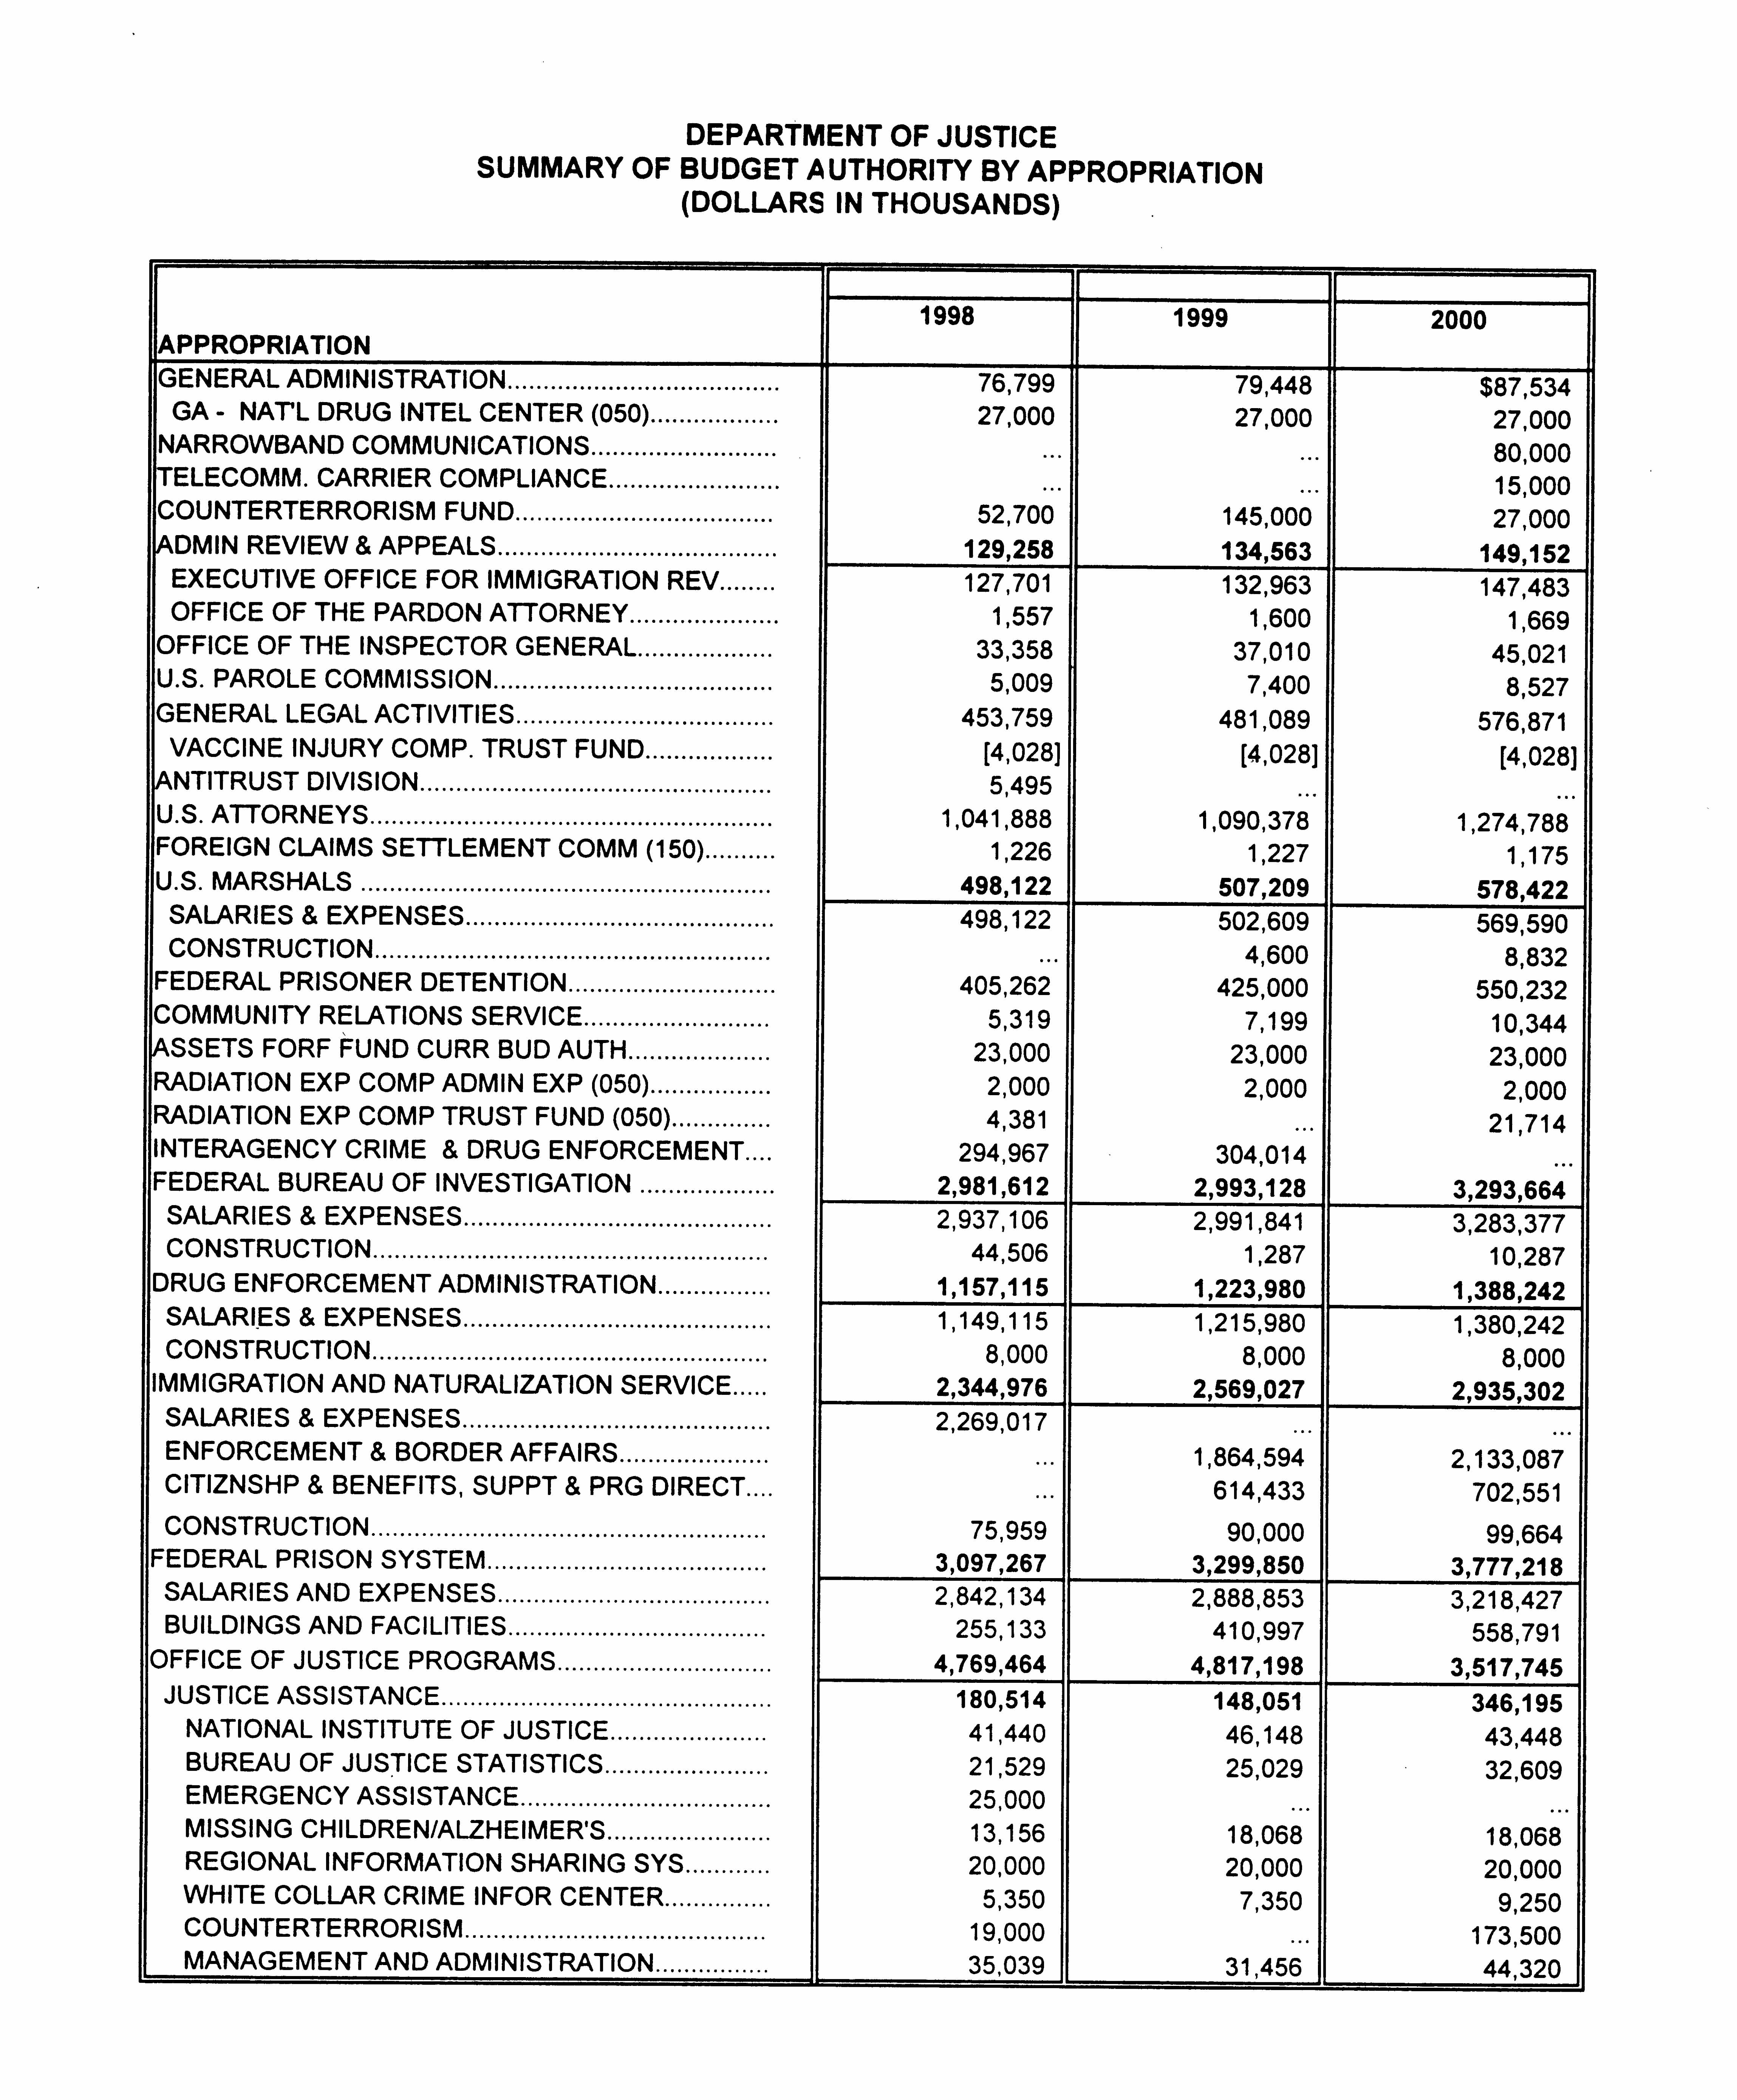 Summary of Budget Authority by Appropriation, 1998 - 2000